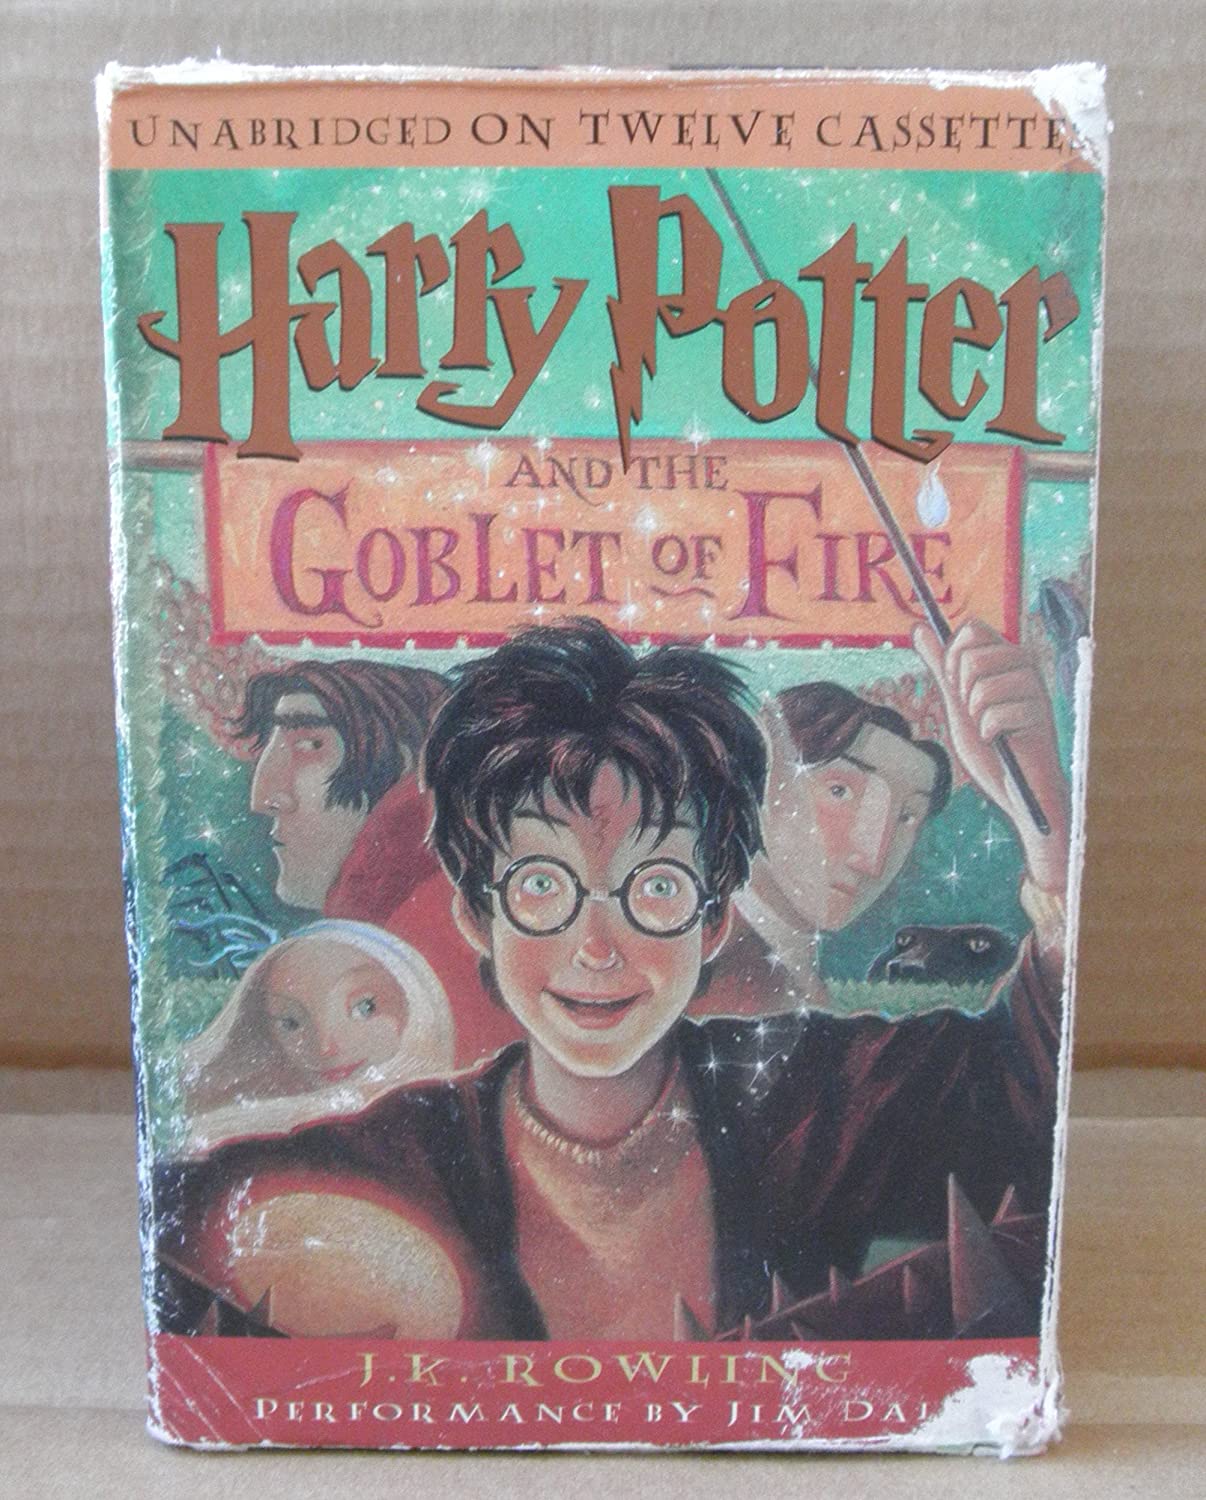 Harry Potter And The Goblet Of Fire Audiobook Free / Listen To Harry ...